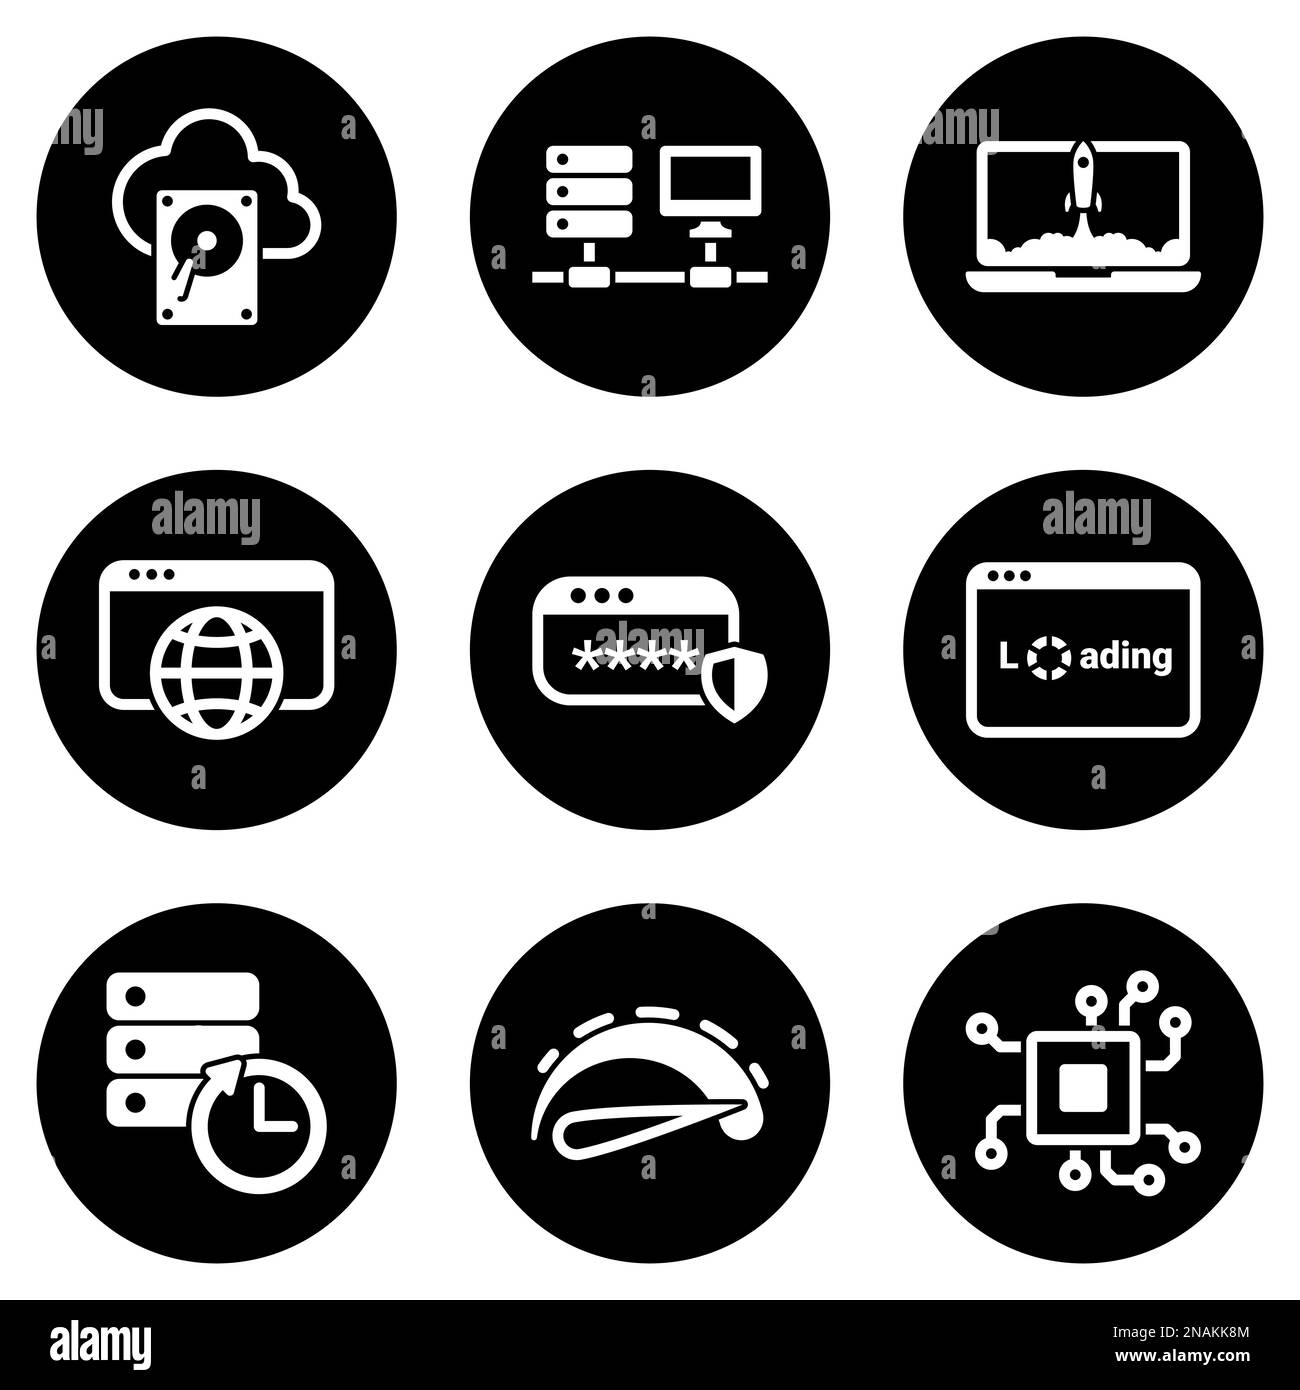 Set of white icons isolated against a black background, on a theme Computer and network Stock Vector